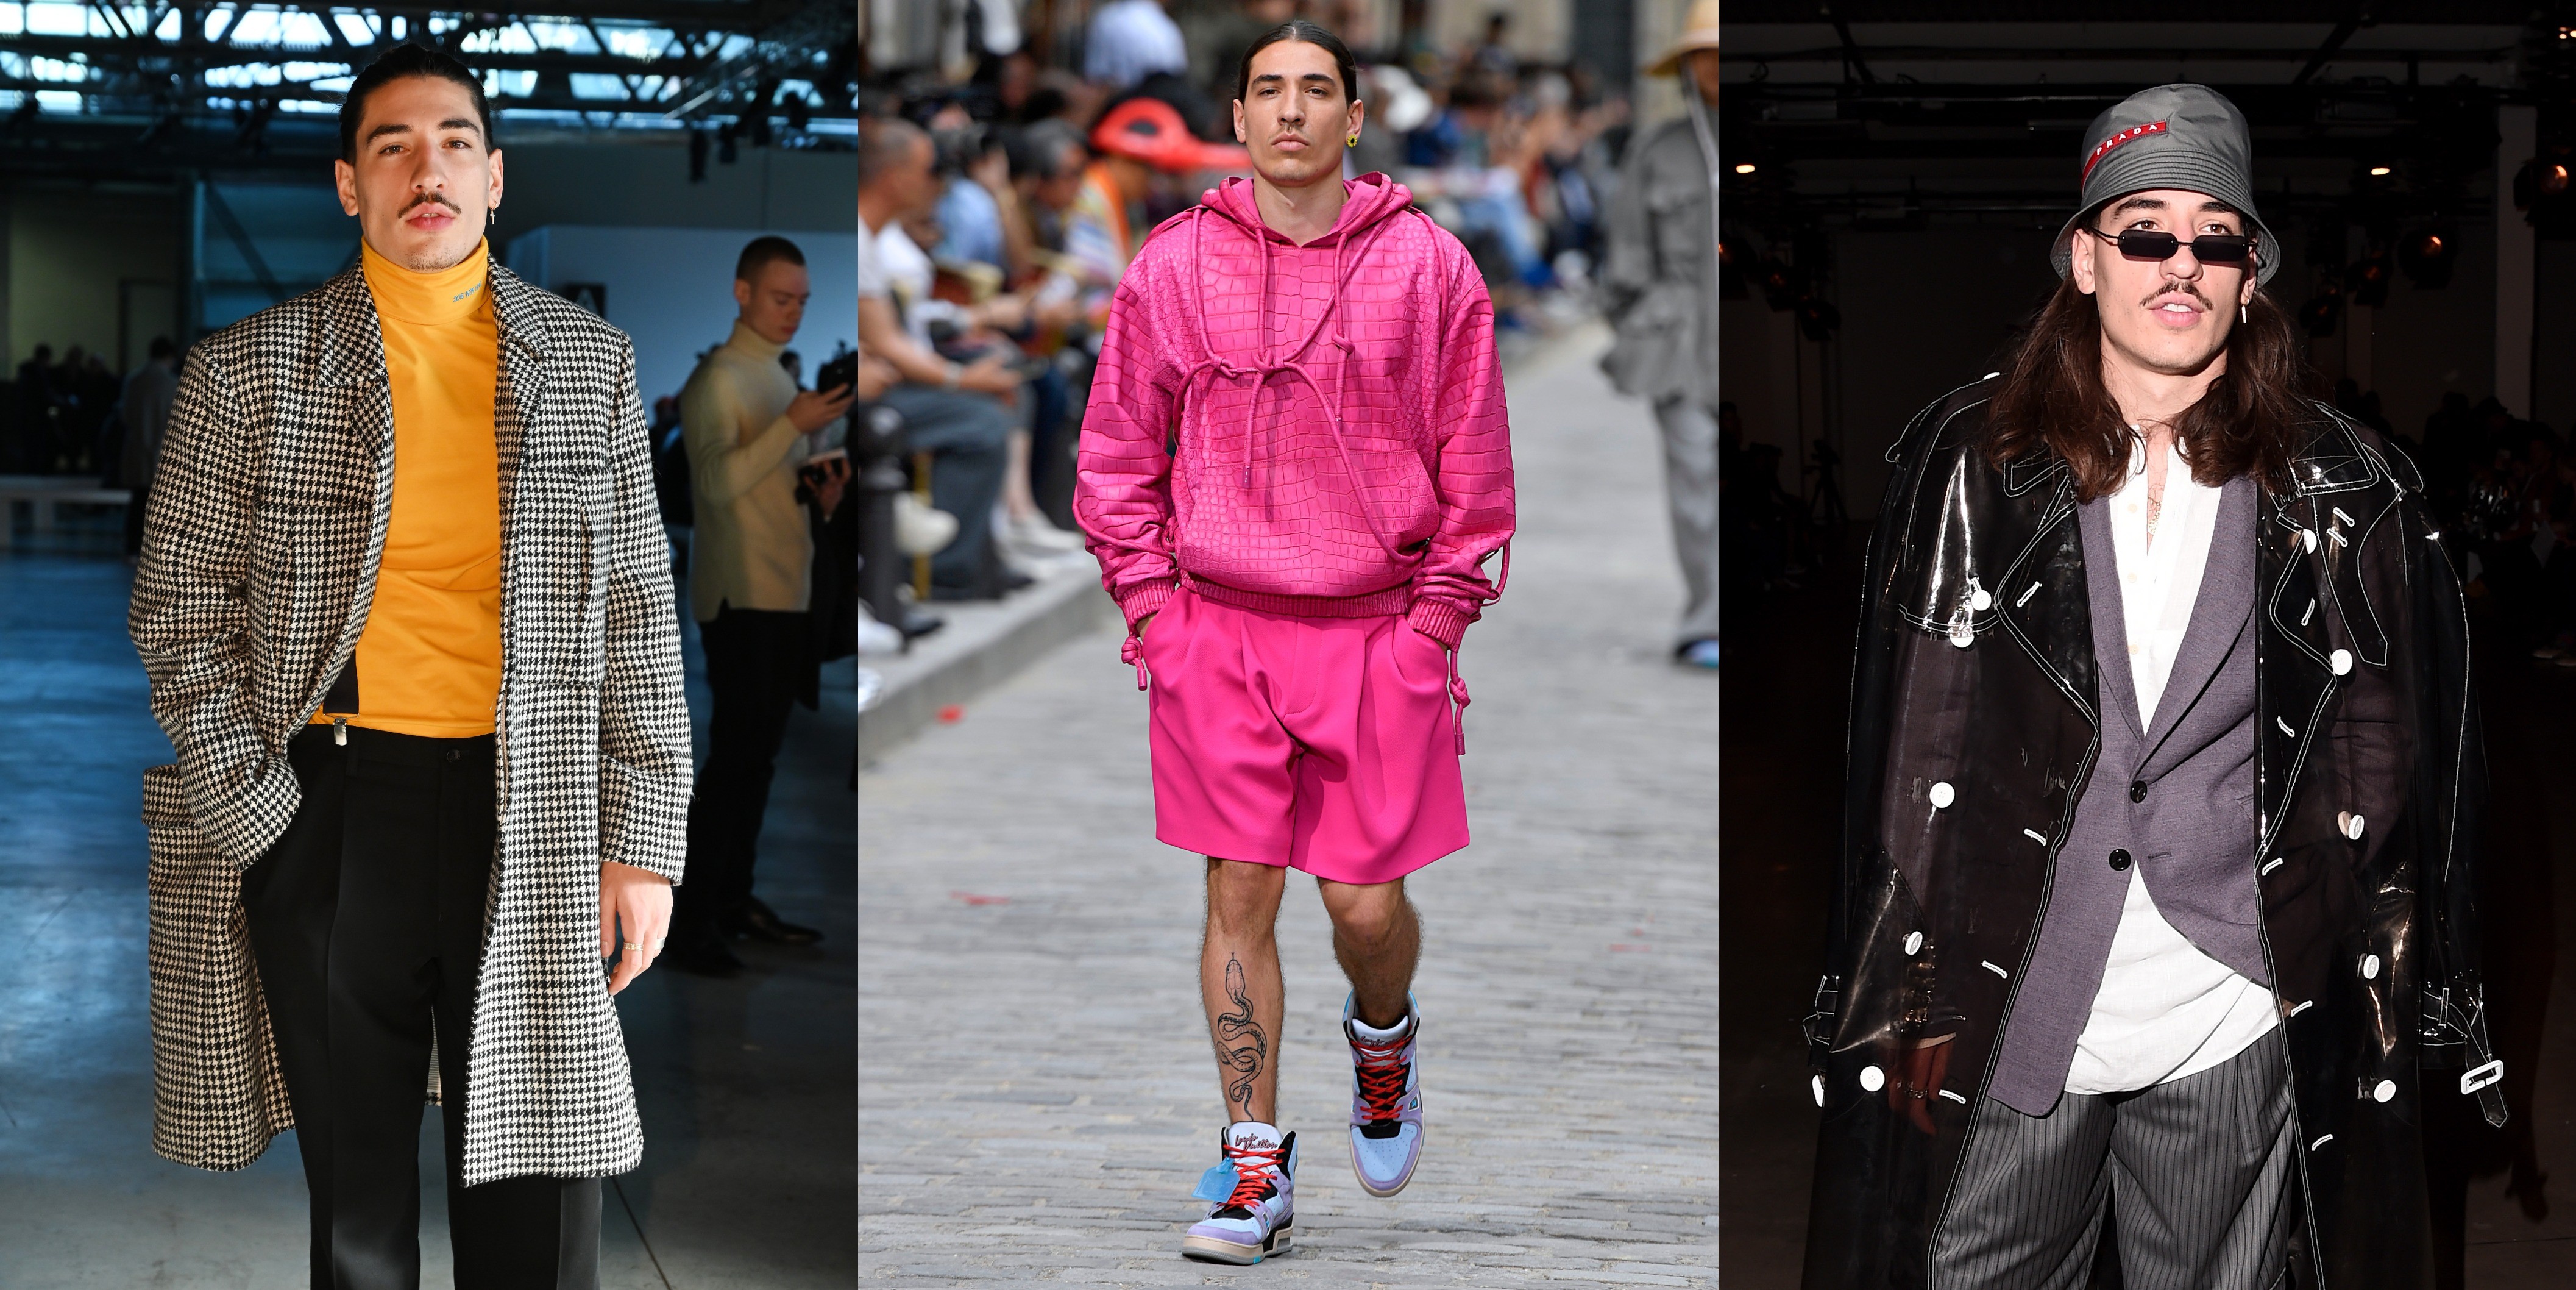 7 of Héctor Bellerín's most iconic outfits